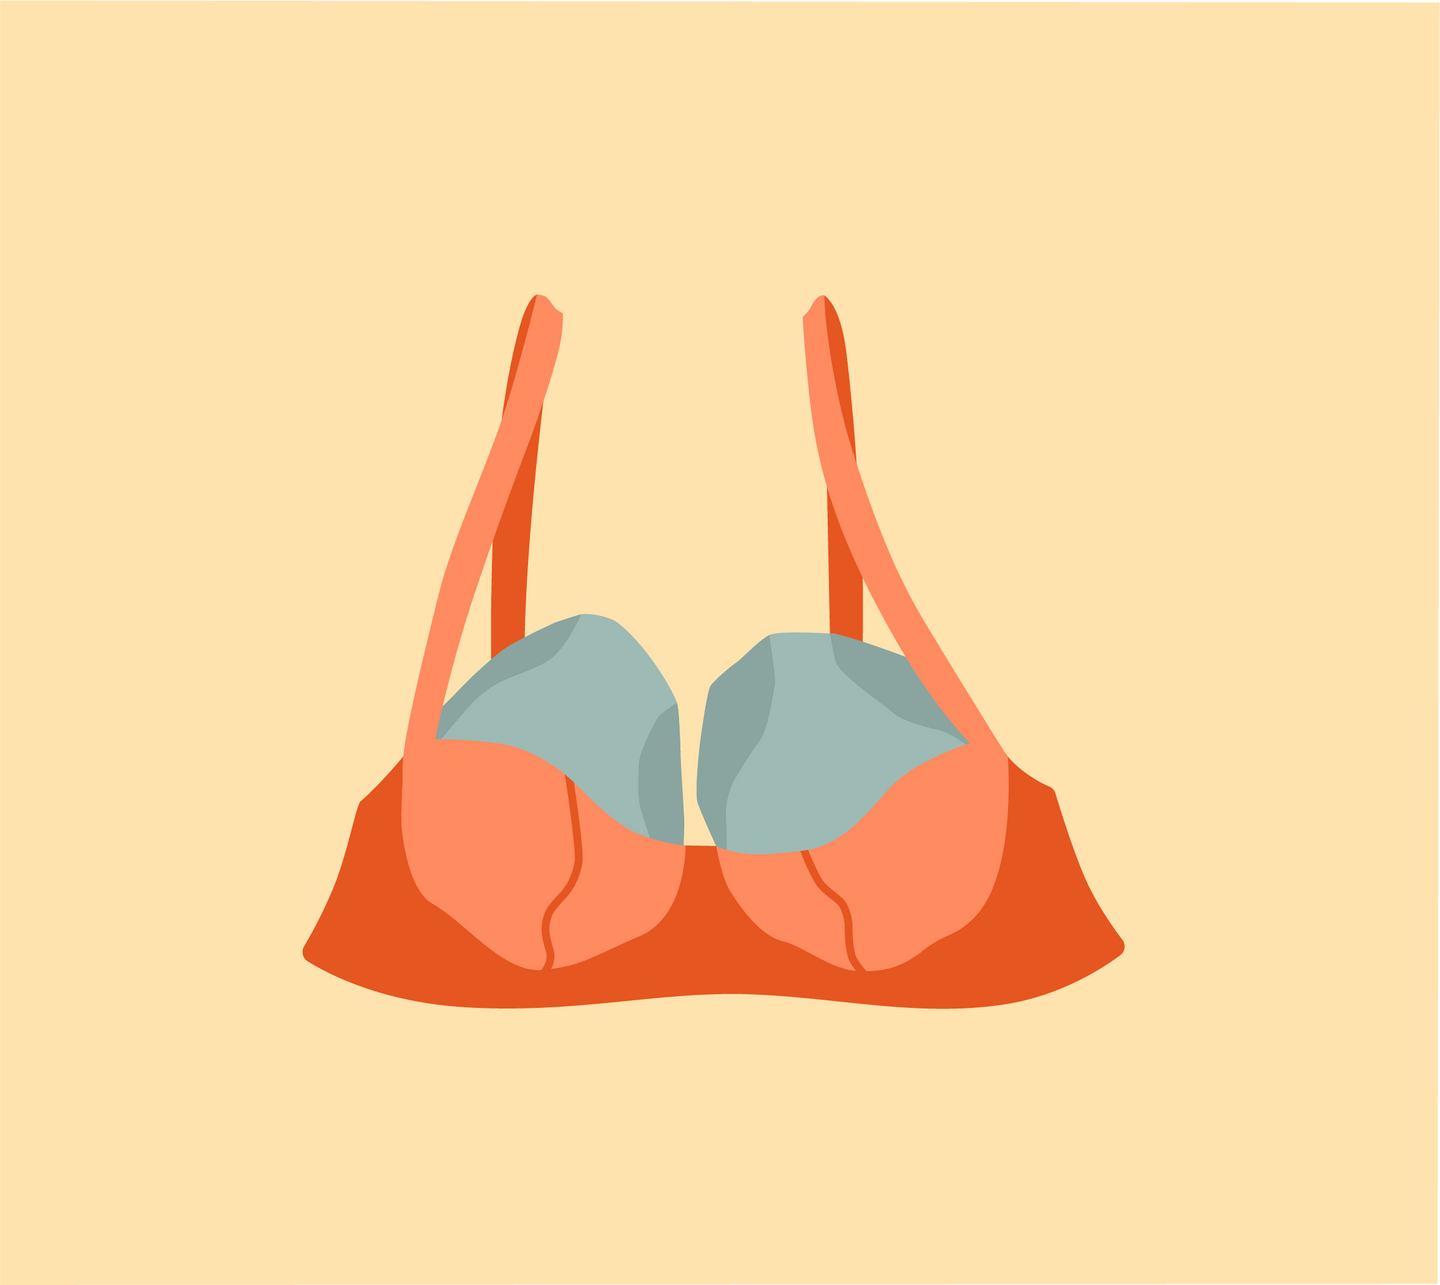 How to Relieve Breast Engorgement